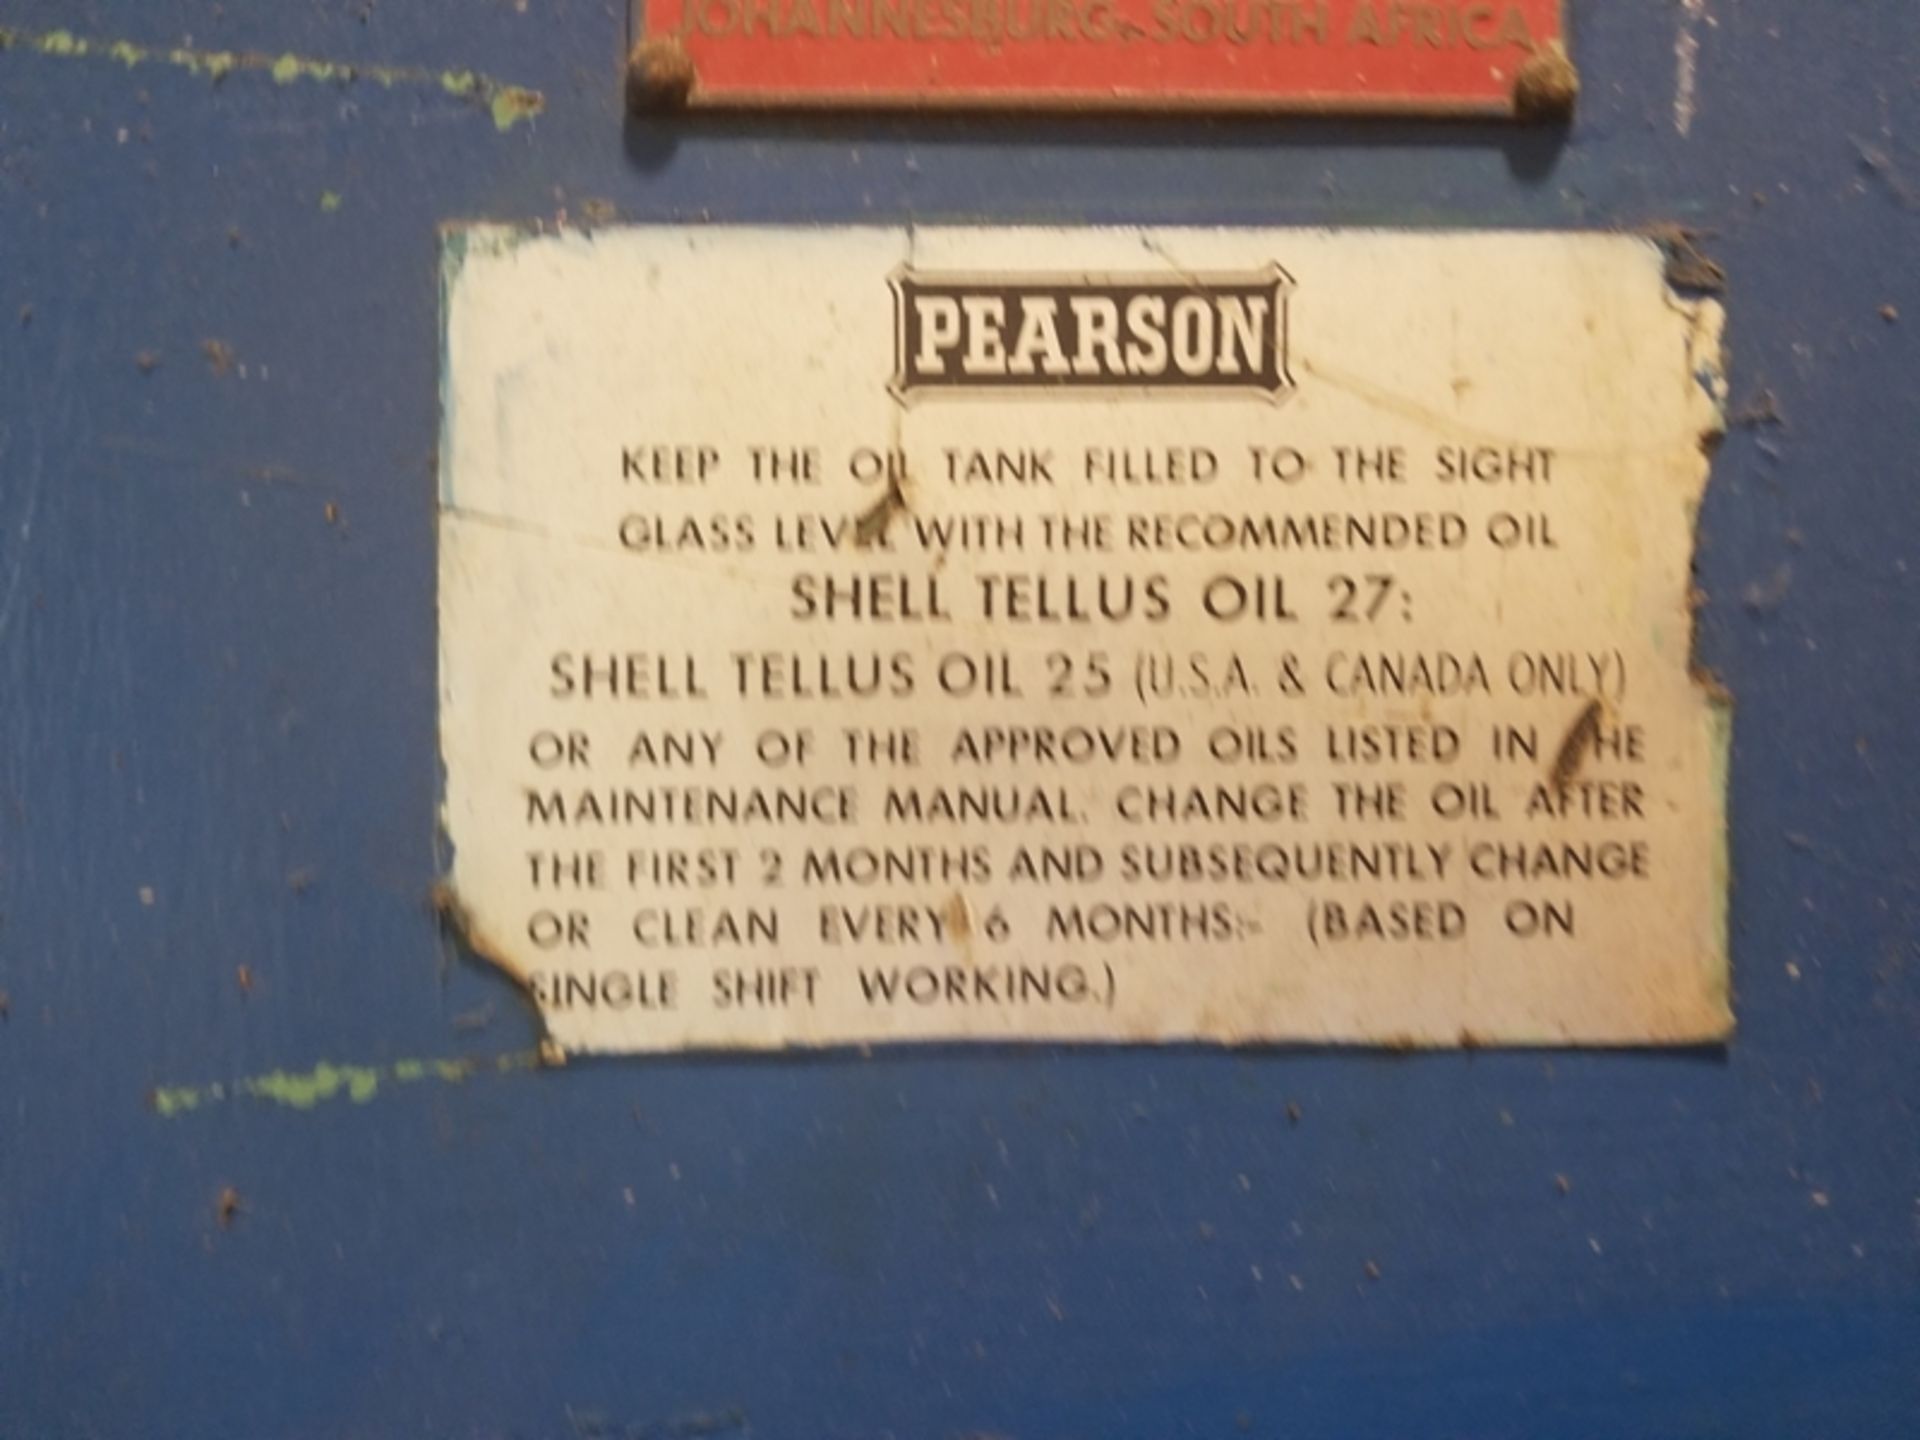 PEARSON 10'x5MS hydraulic sheer number 5594/3 (1970) - Image 4 of 6